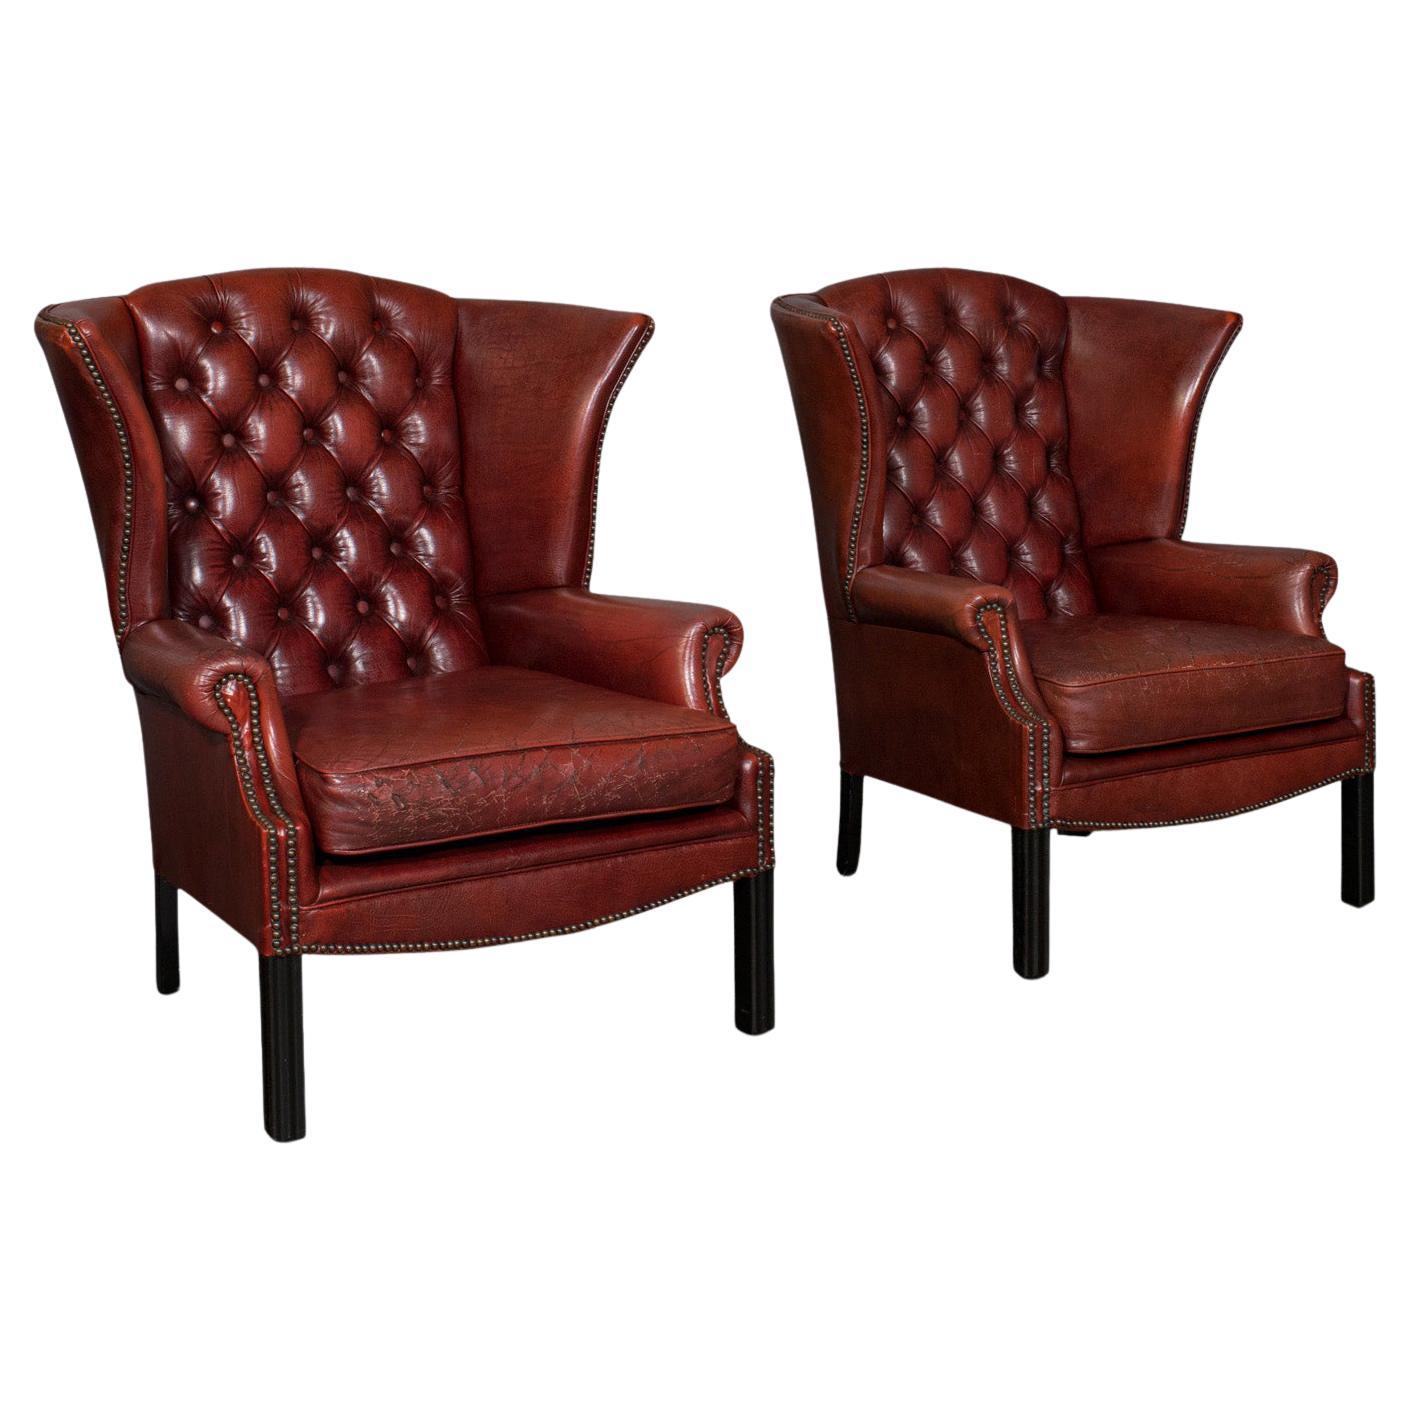 Pair of Vintage Clubhouse Wingback Chairs, English, Leather, Armchair, C.1950